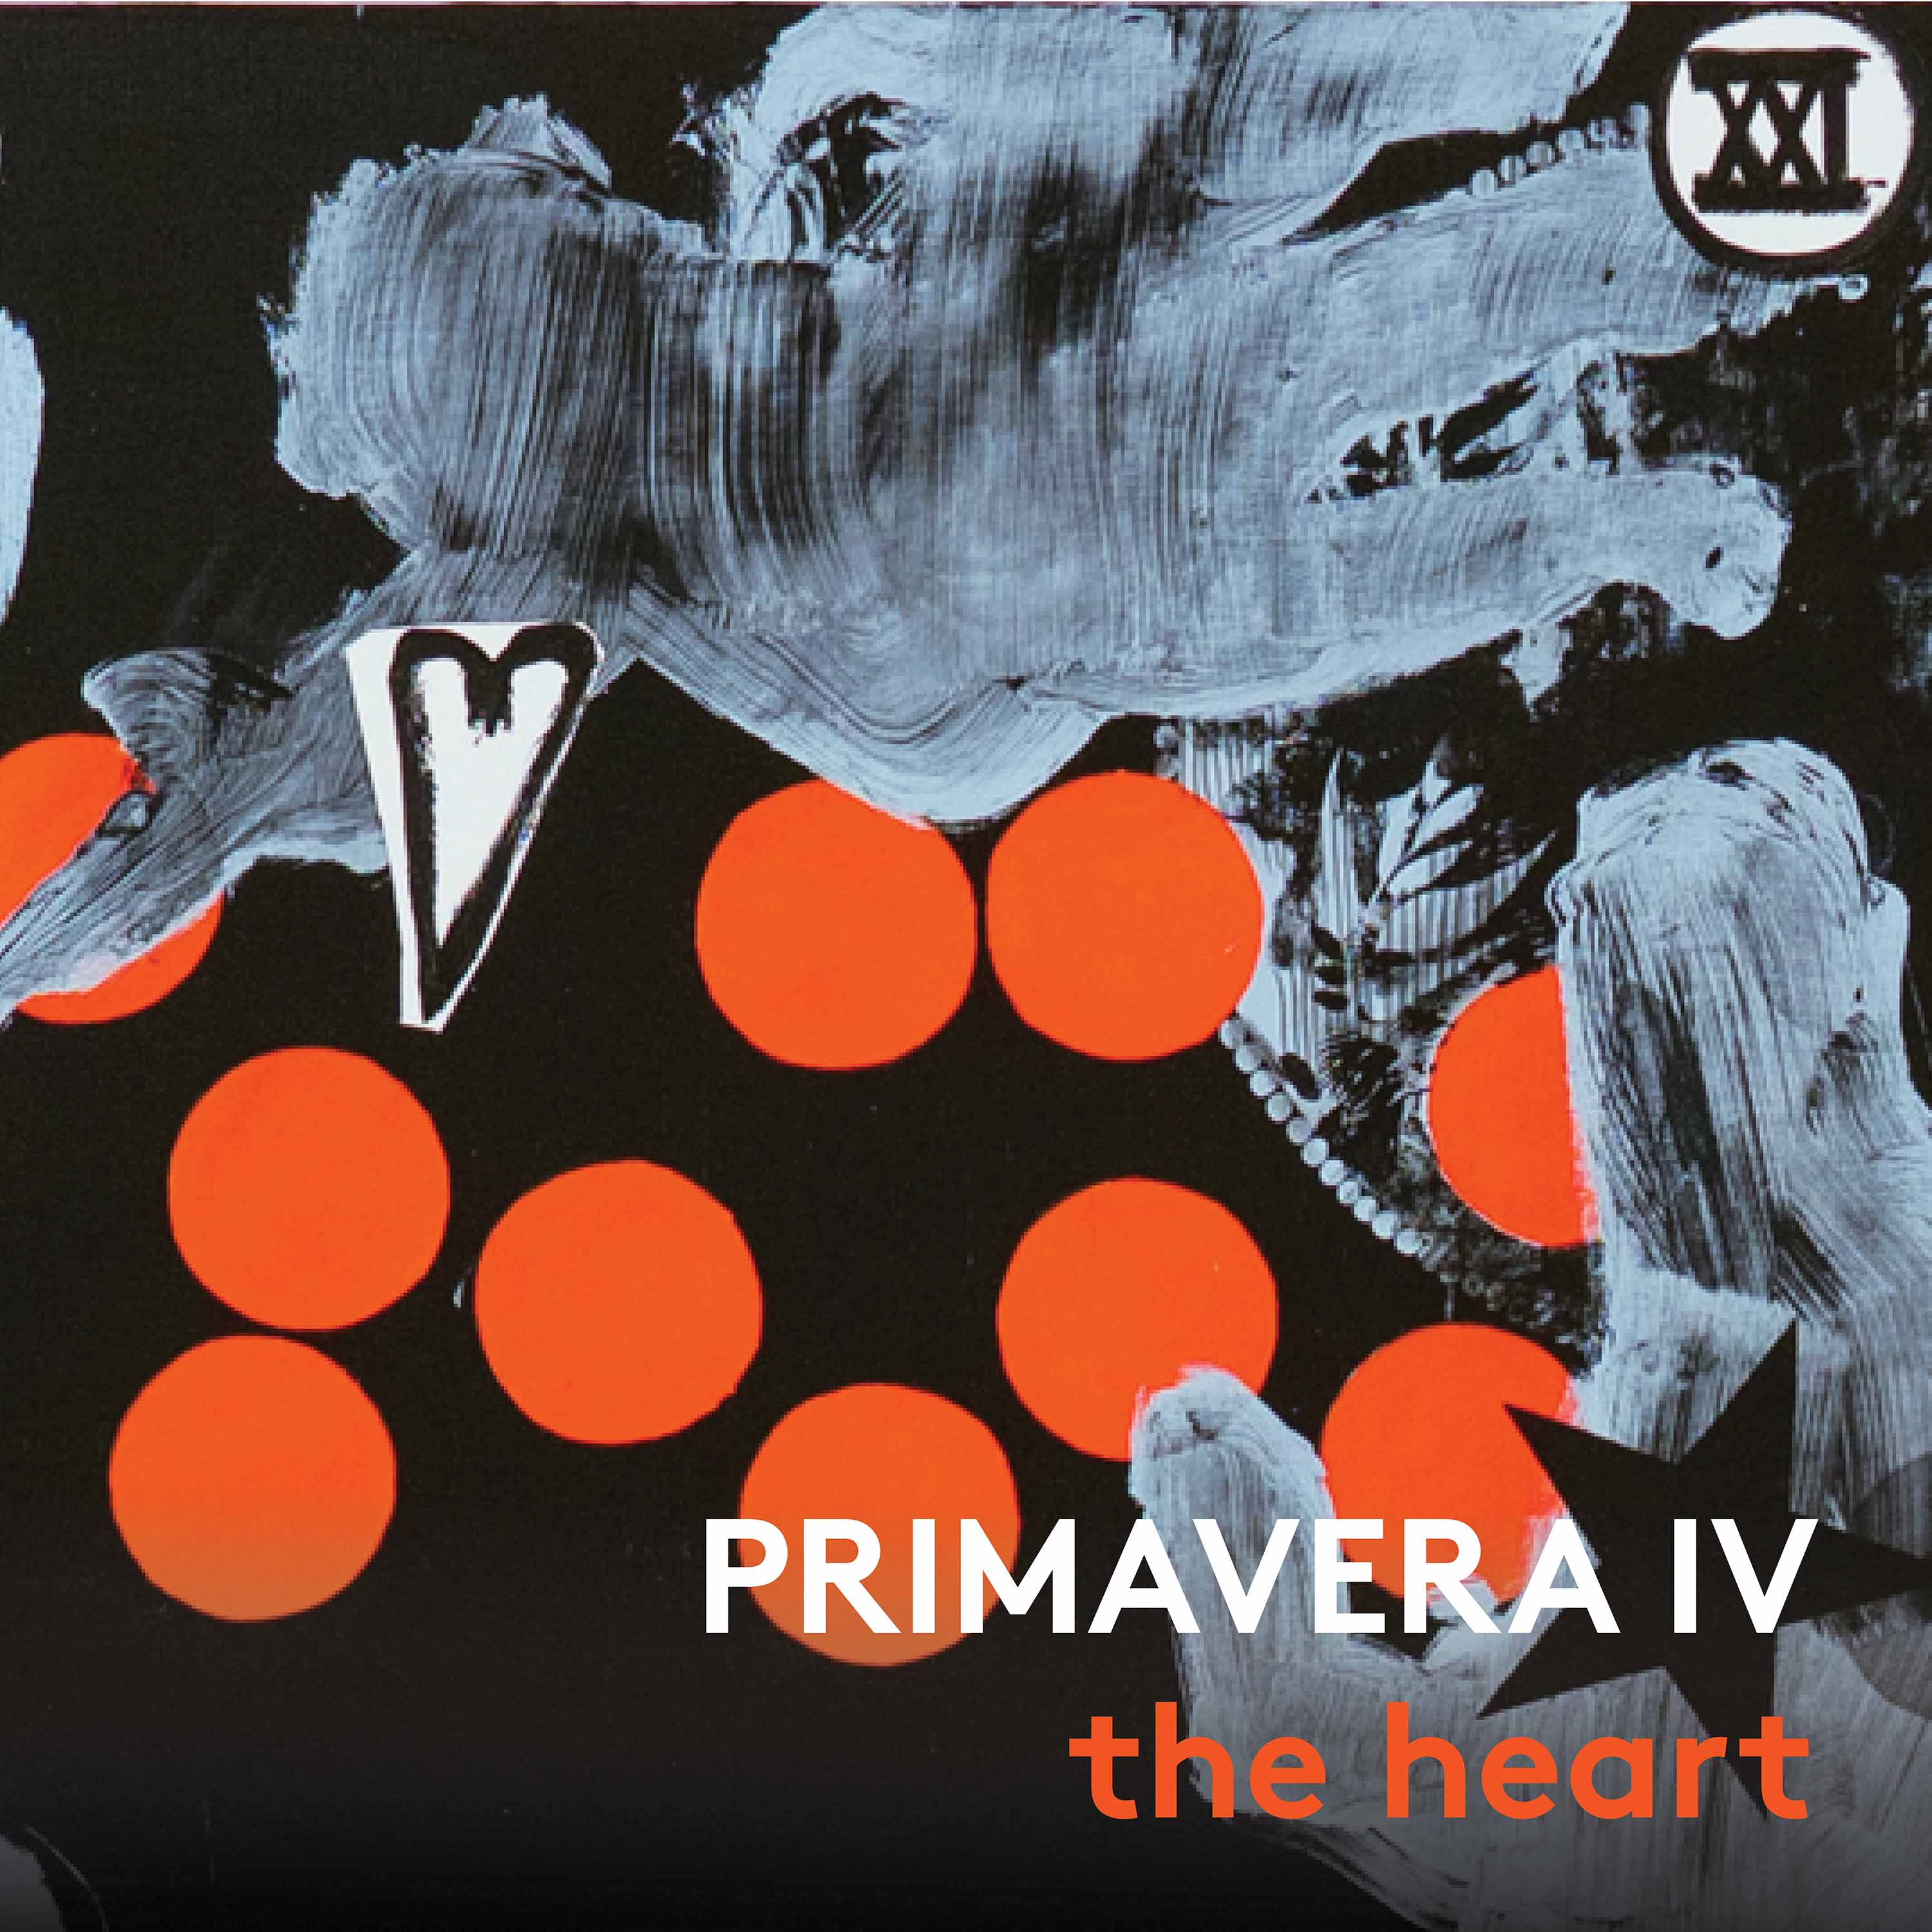 Review: The WholeNote on PRIMAVERA IV the heart